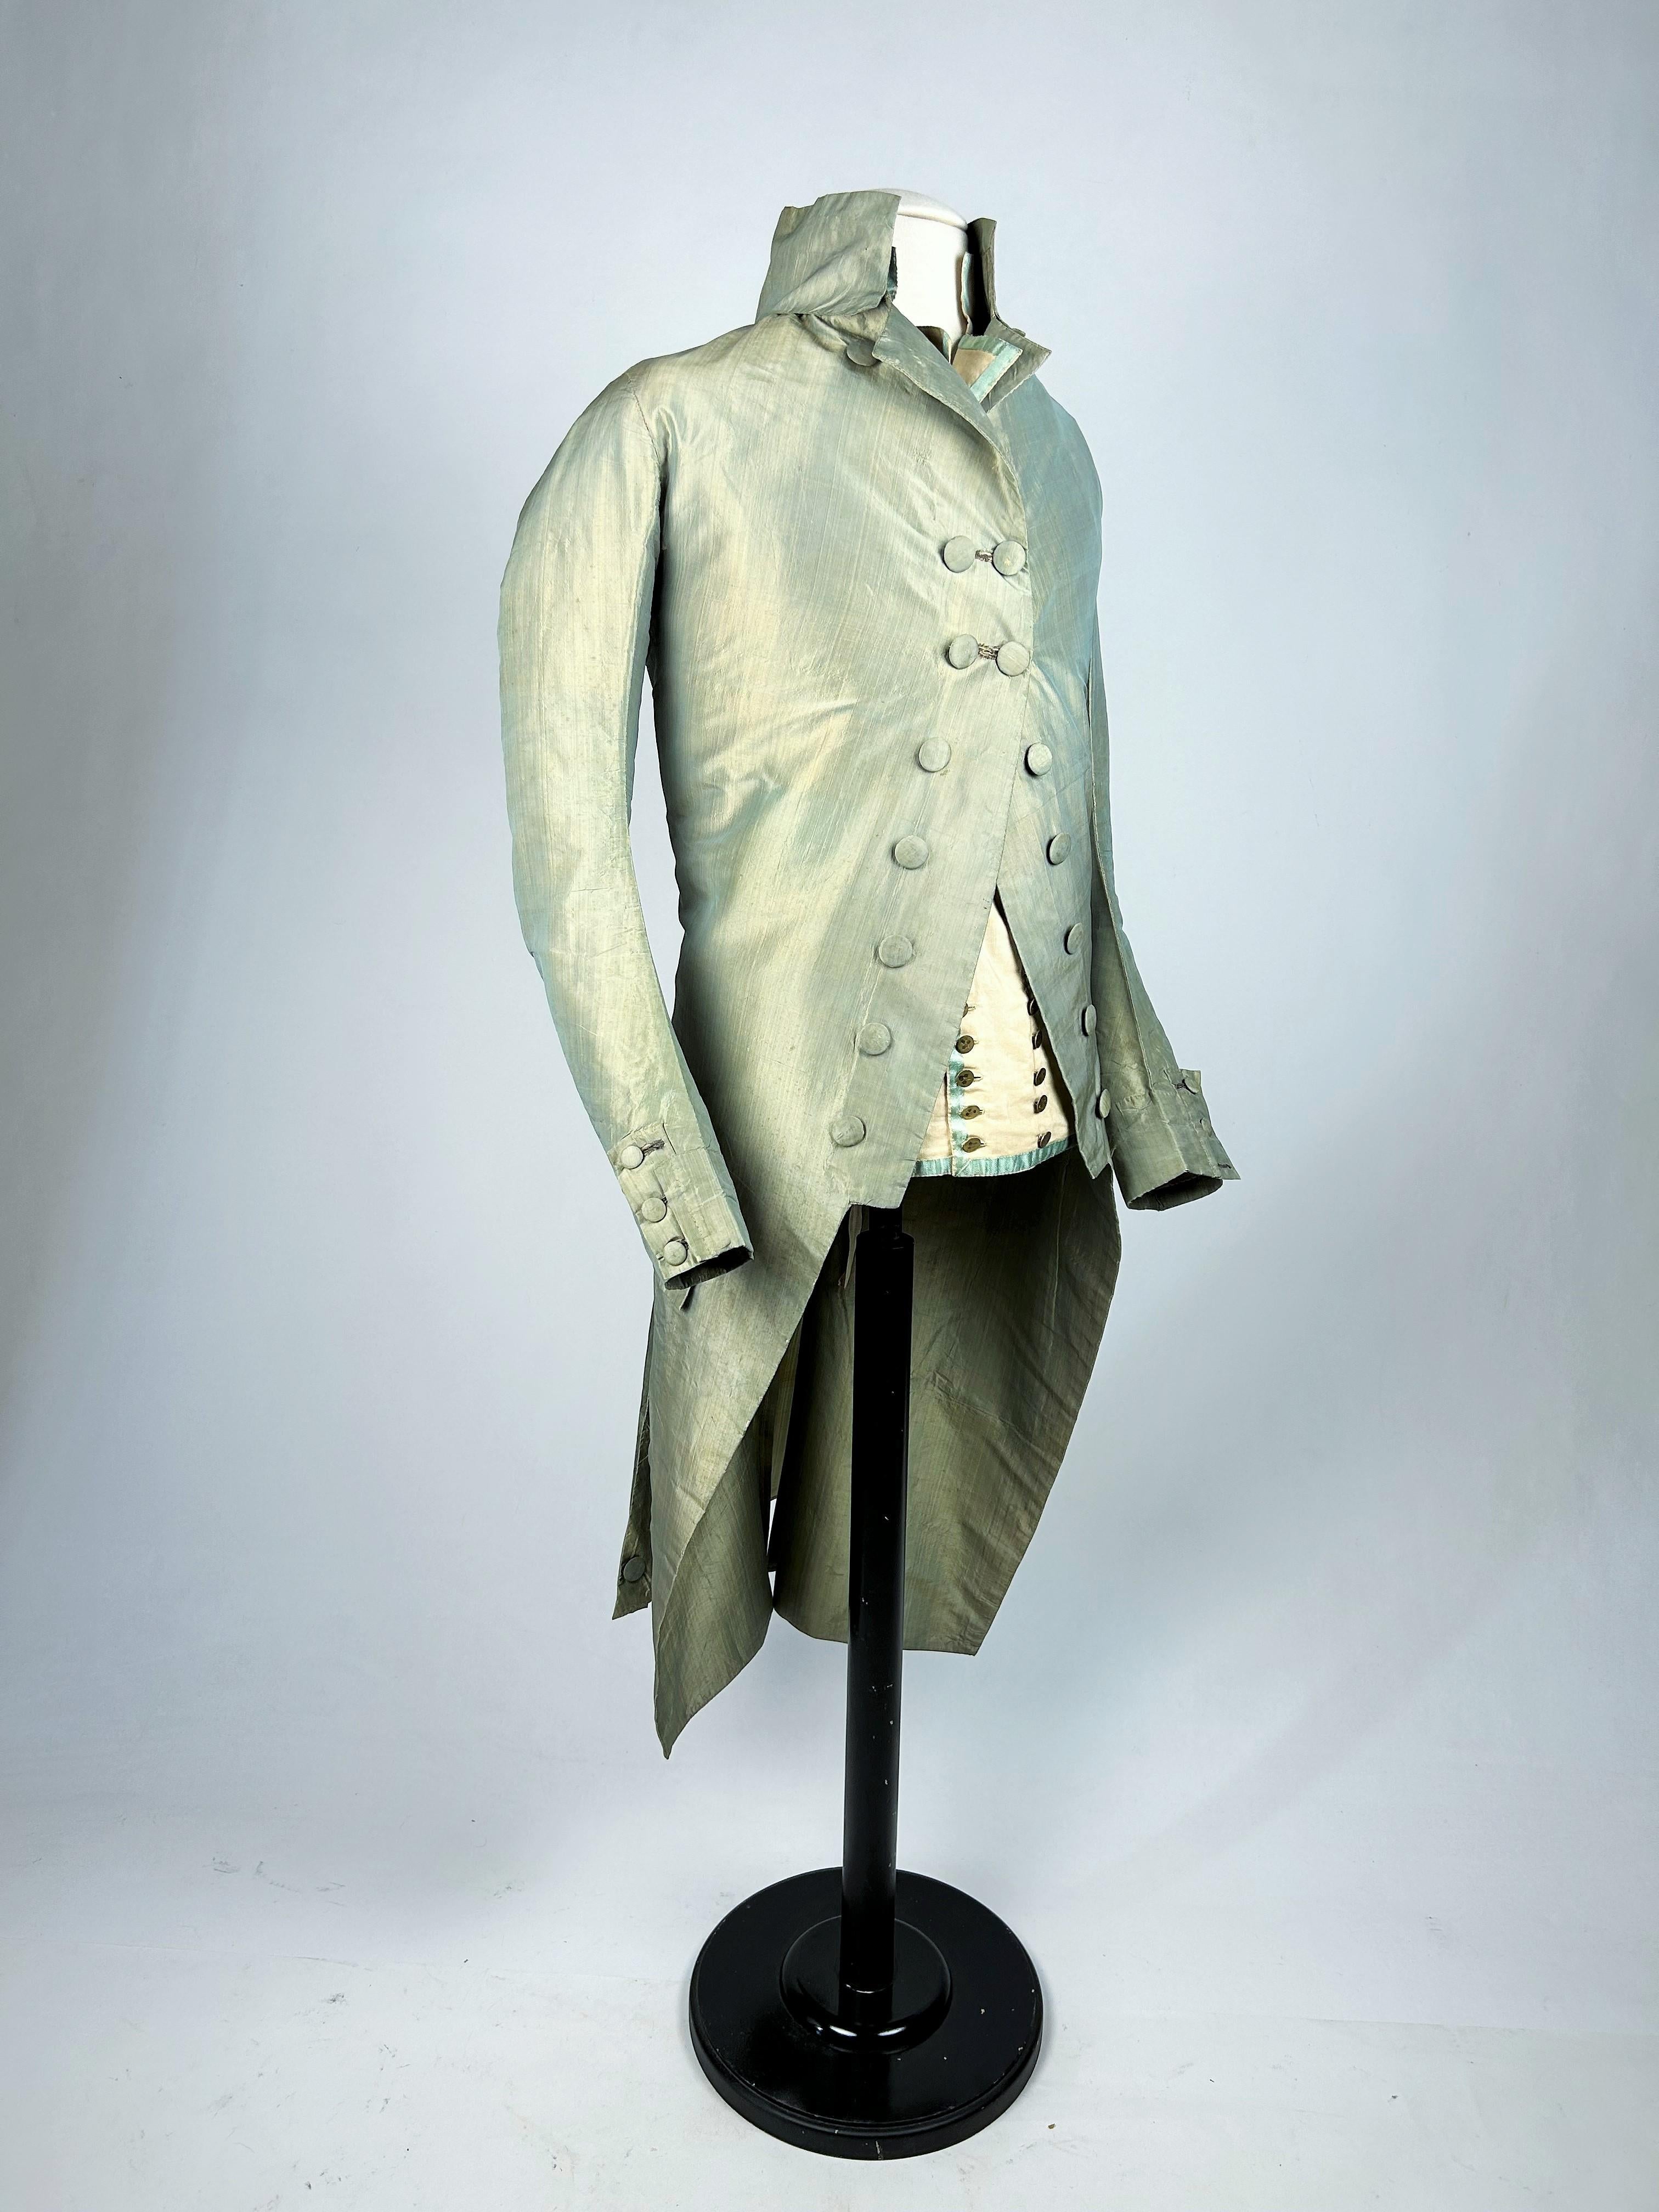 Circa 1785-1790
England

Summer suit in changeable taffeta and its cotton waistcoat, set collected in England. Frockcoat, high collar, long angled sleeves in blue and yellow changeable taffeta giving a subtle greenish greyness. Fitted cut with